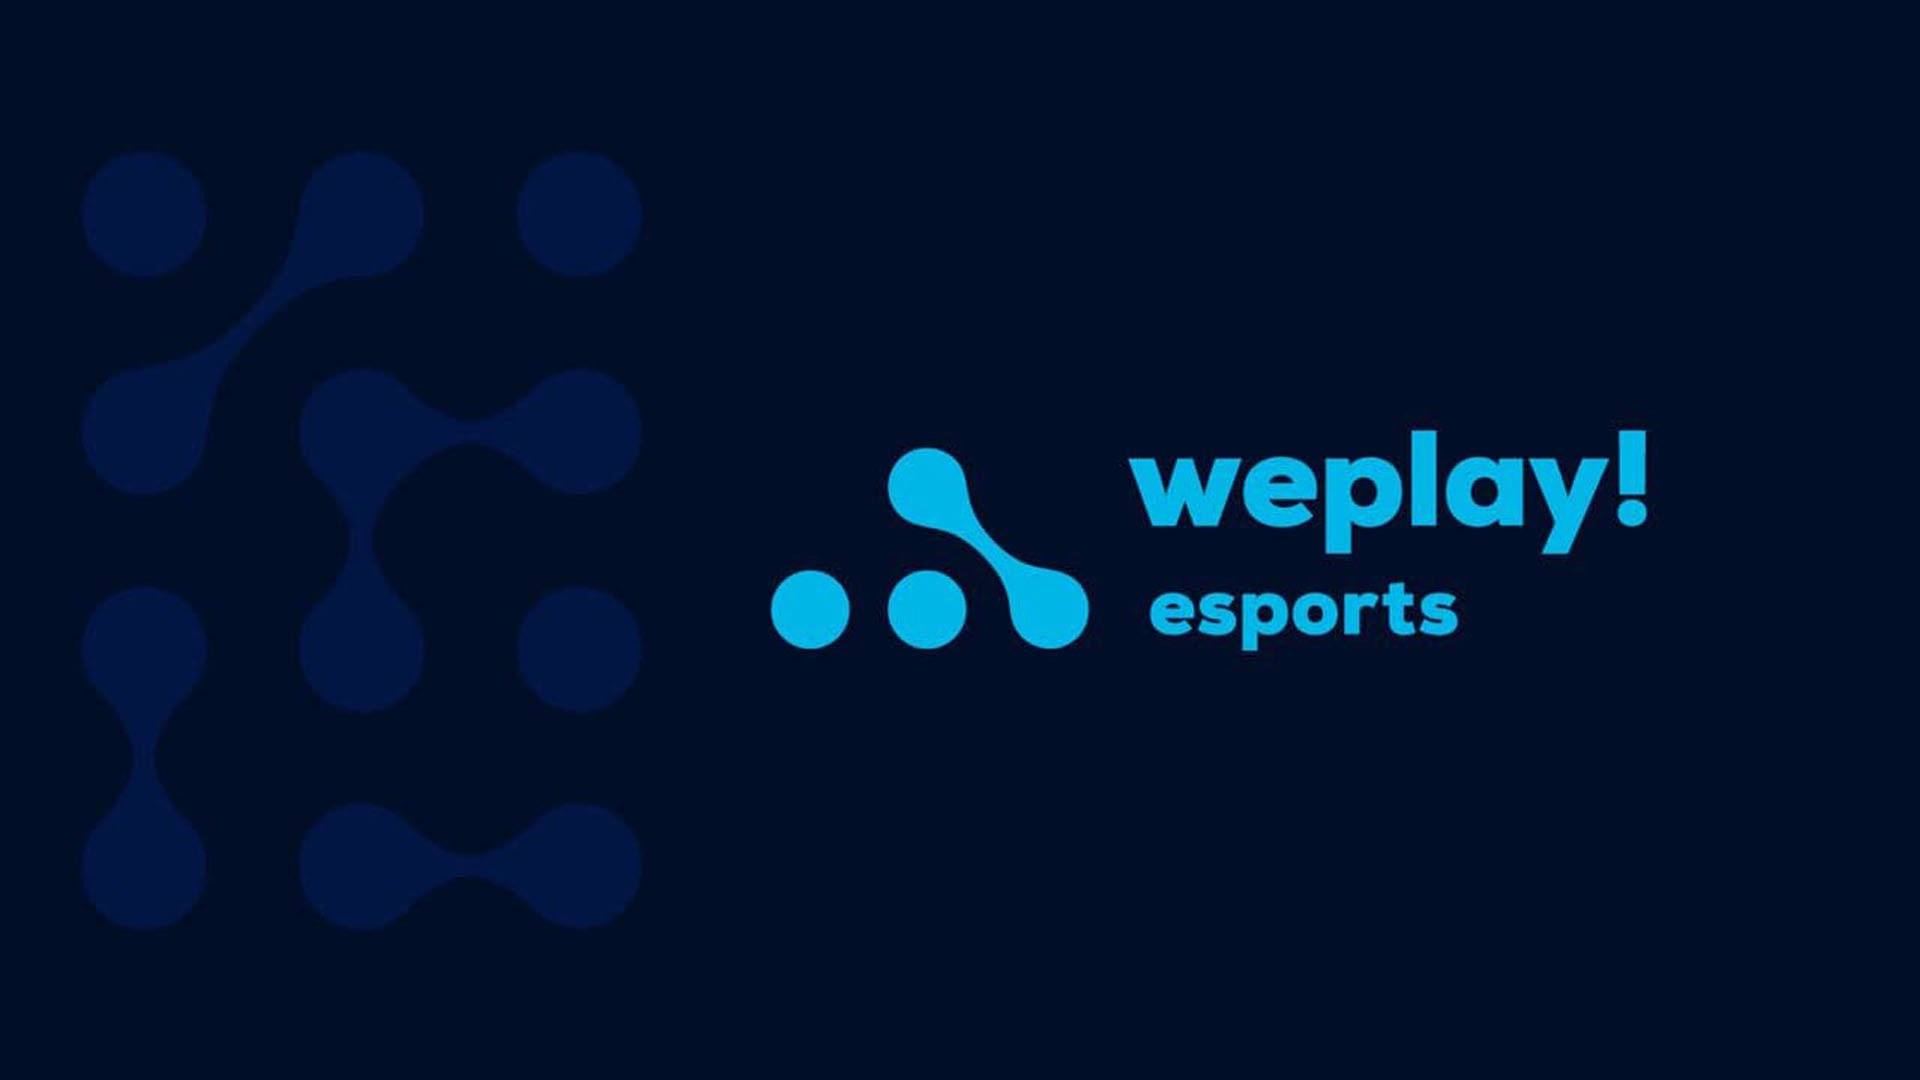 About WePlay Esports plans for 2021 and 2022